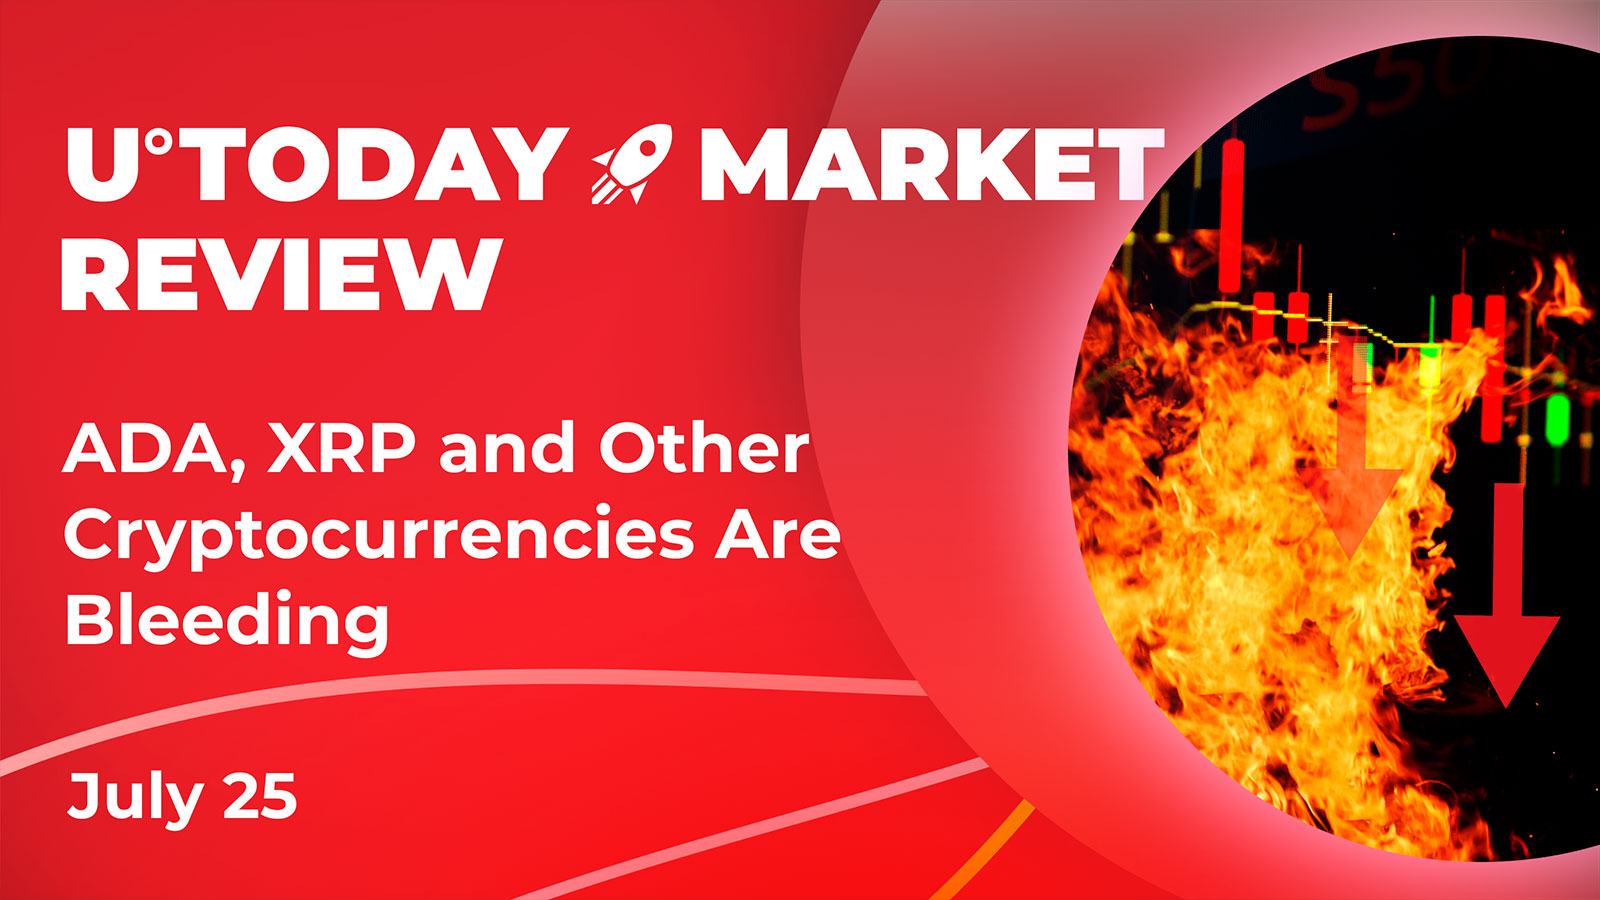 Cardano, XRP and Others Losing 5%-10%, But Its Way Too Early to Panic: Crypto Market Review, July 25